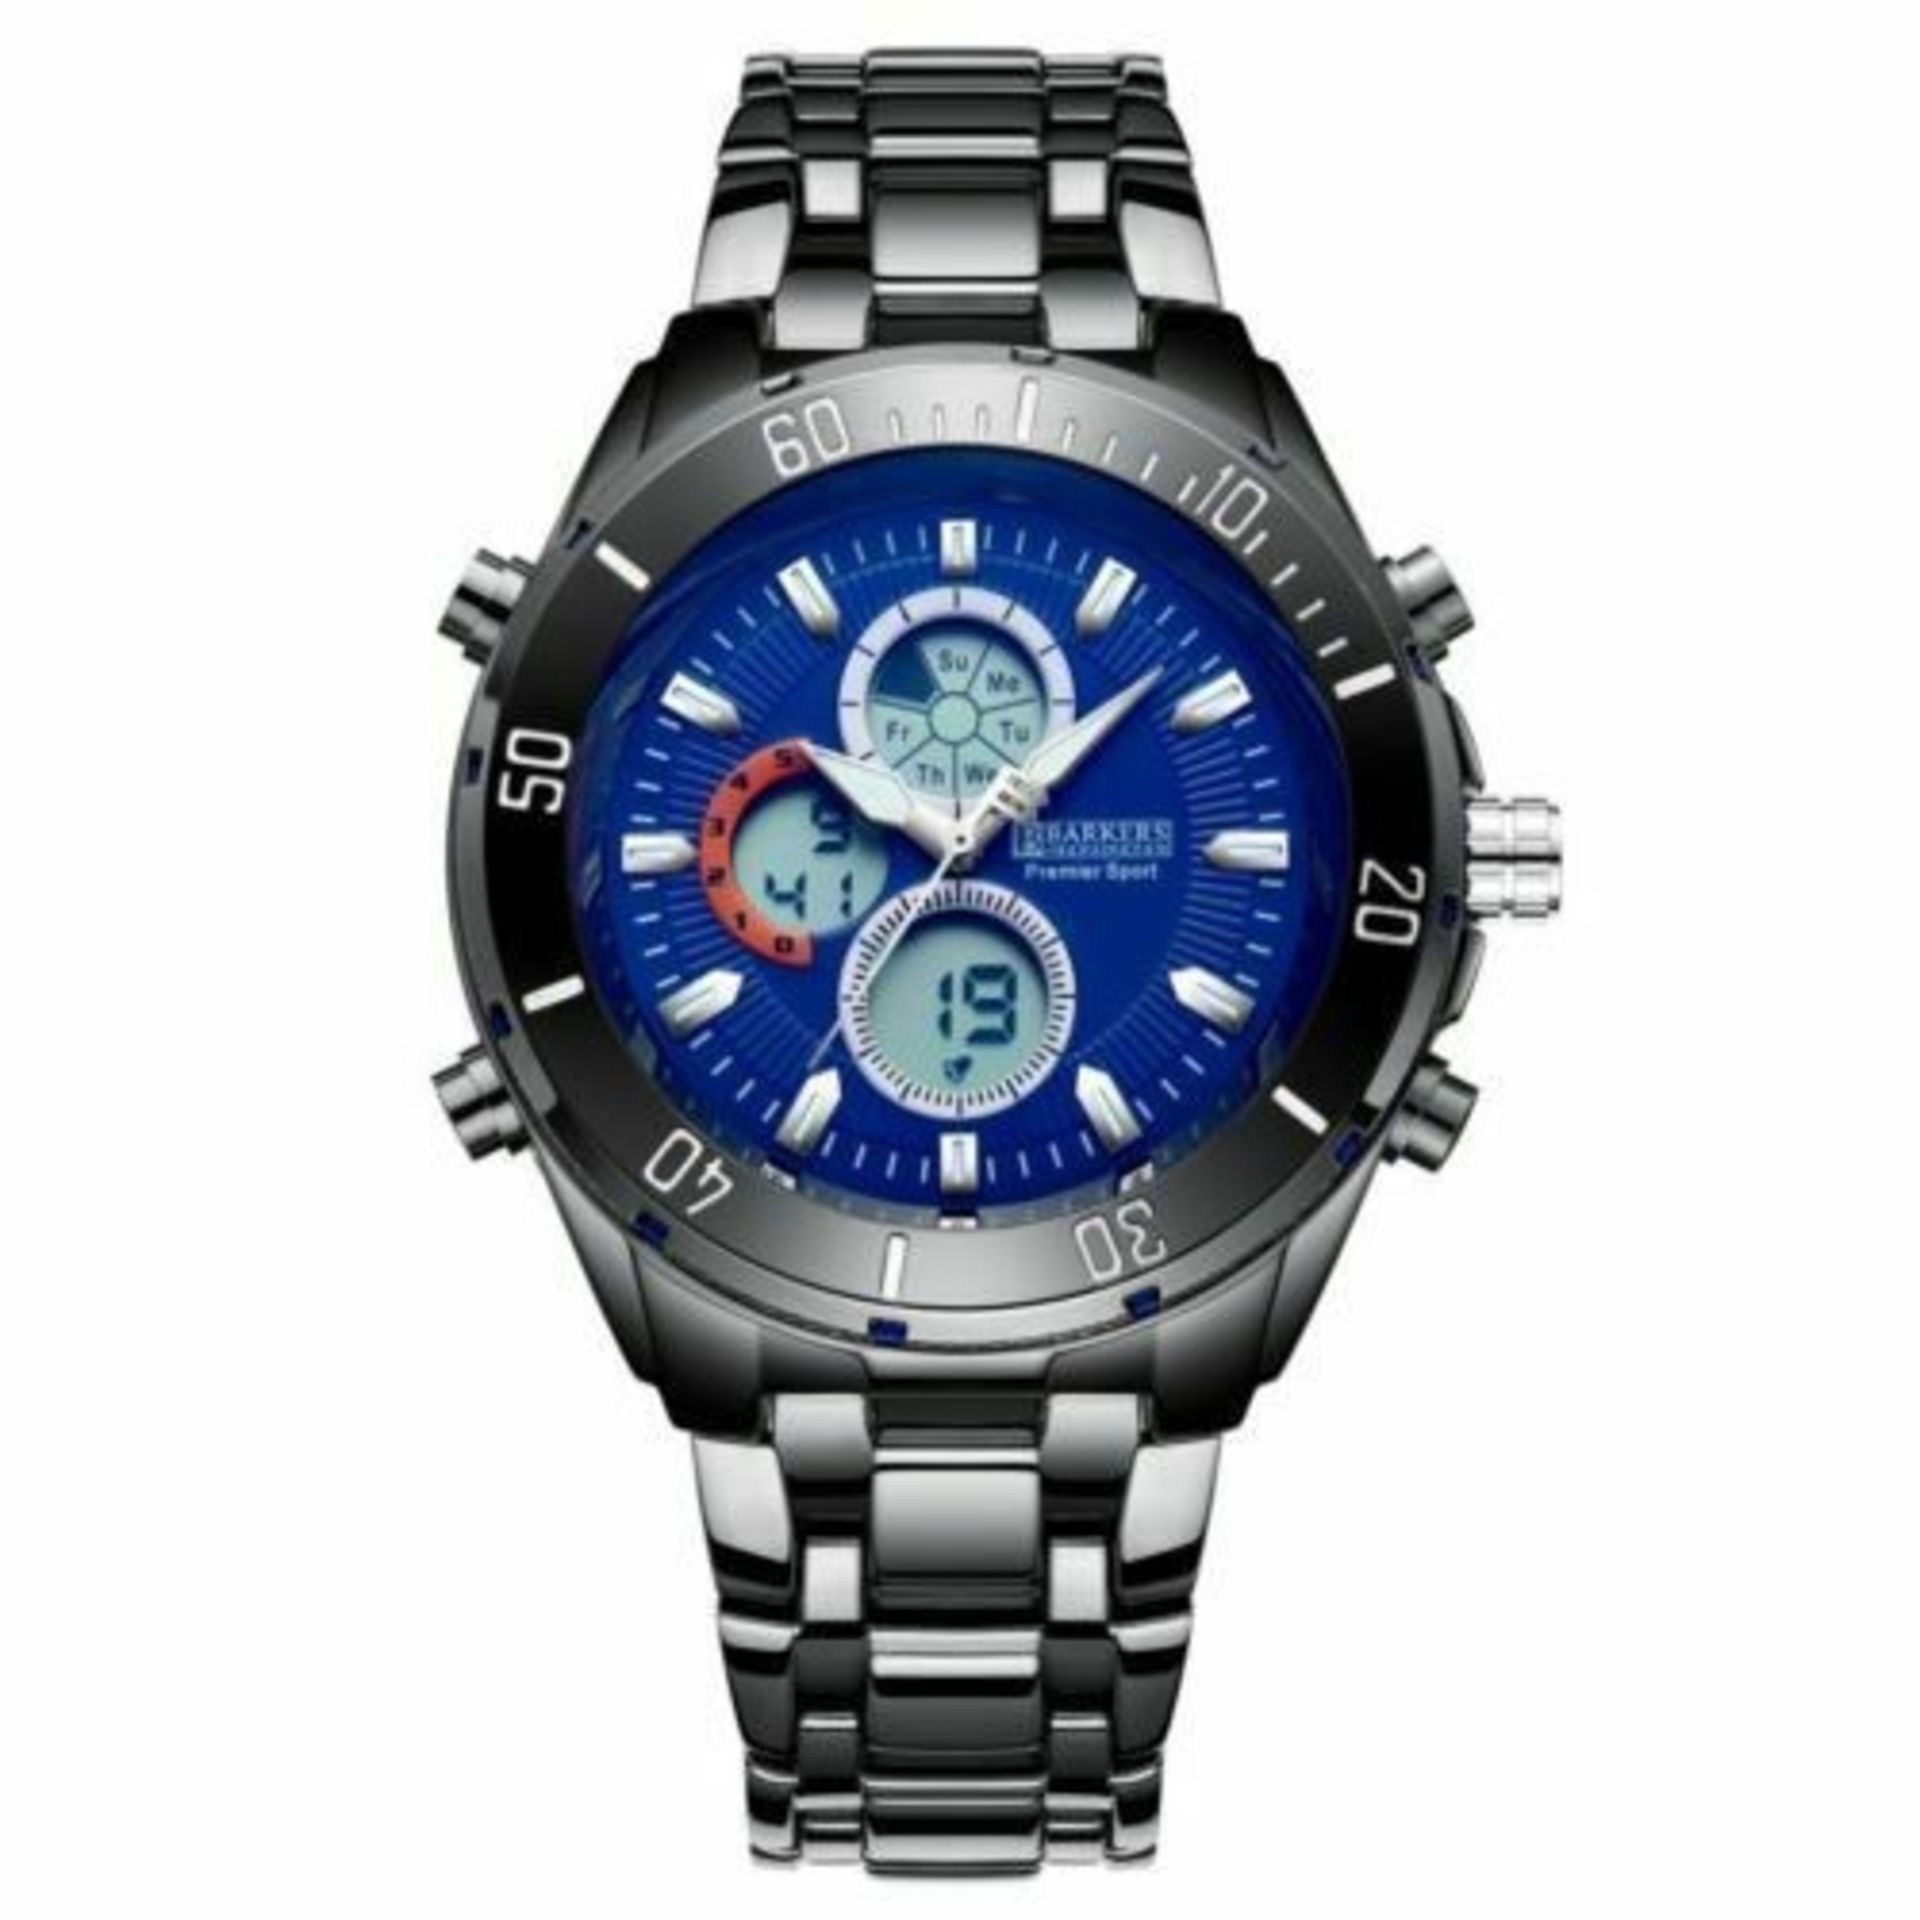 Barkers of Kensington Blue Premier Sports watch, New & boxed with a 5 year warranty included